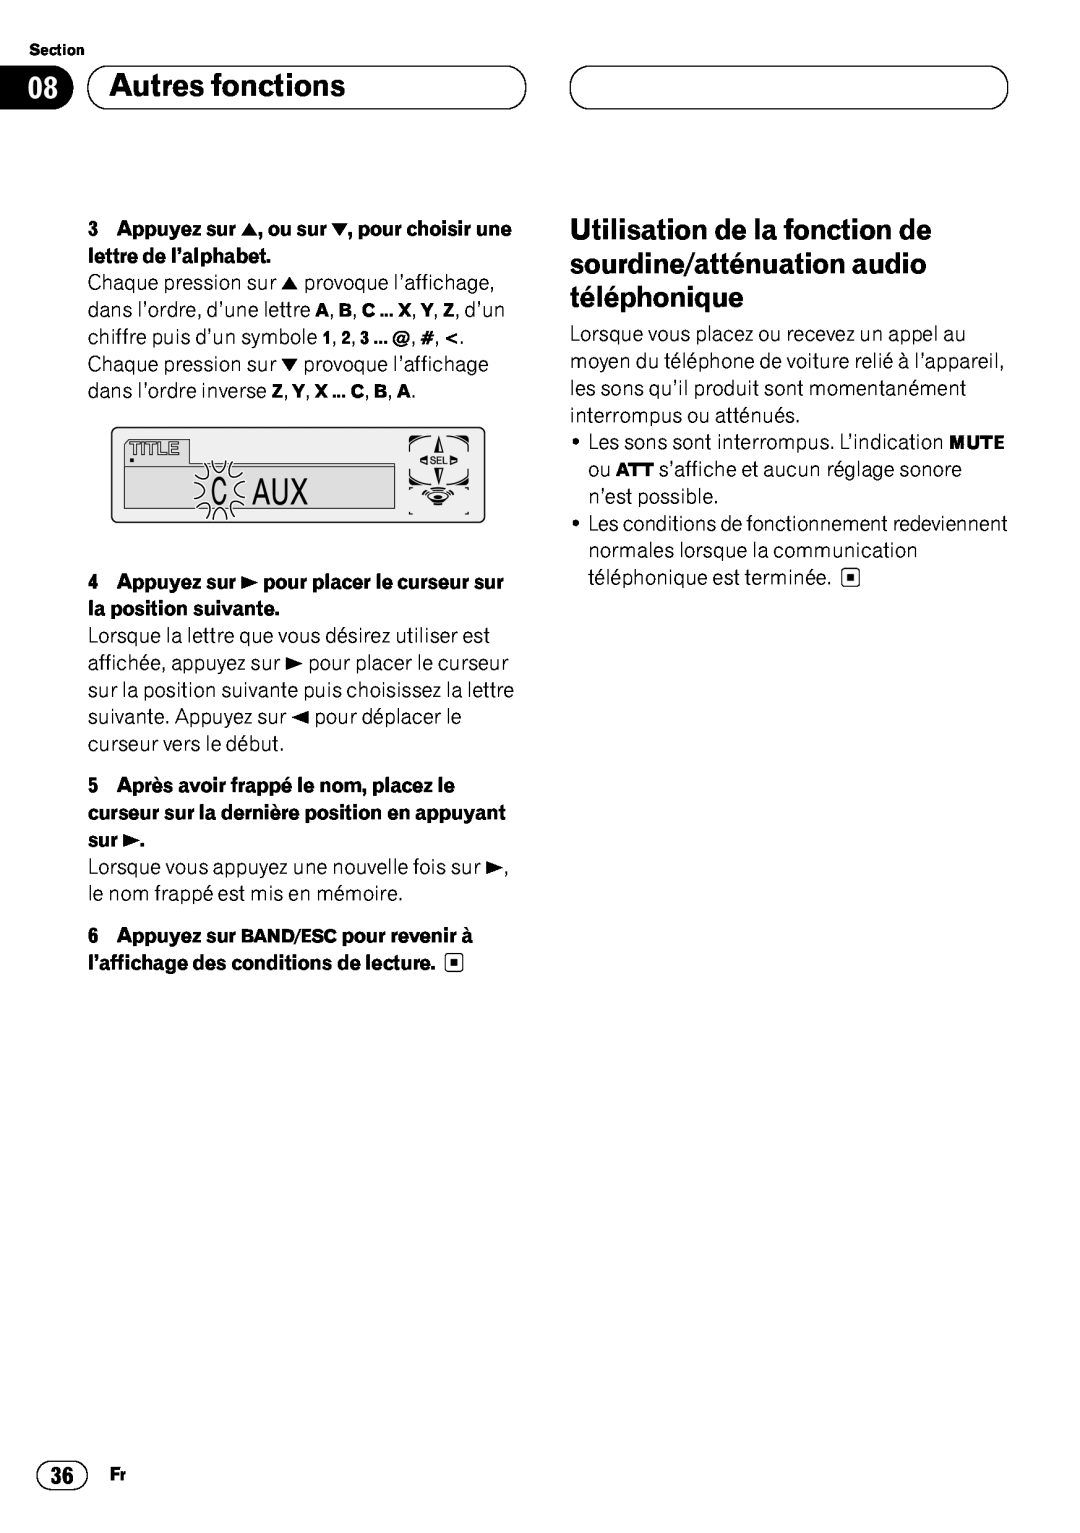 Pioneer DEH-P6400 operation manual 08Autres fonctions, 36Fr 